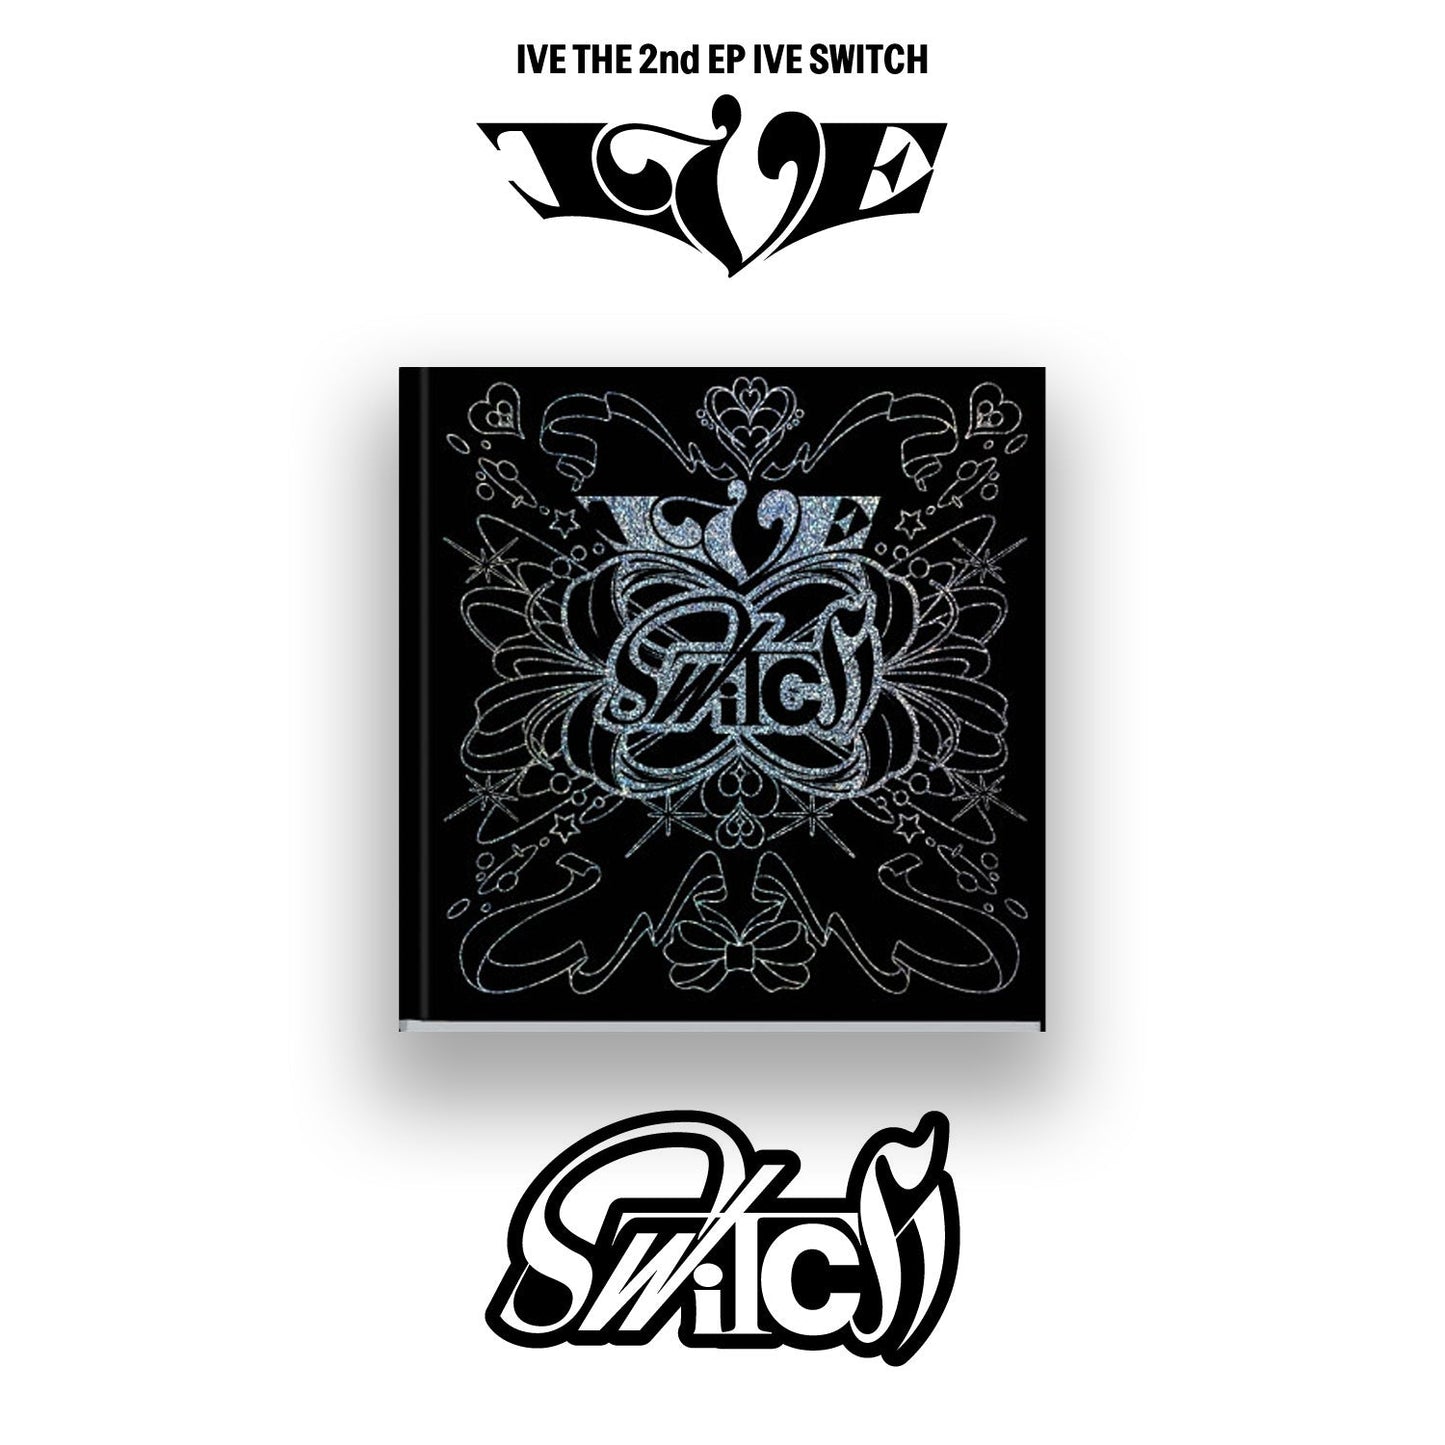 IVE 2ND EP ALBUM 'IVE SWITCH' OFF VERSION COVER